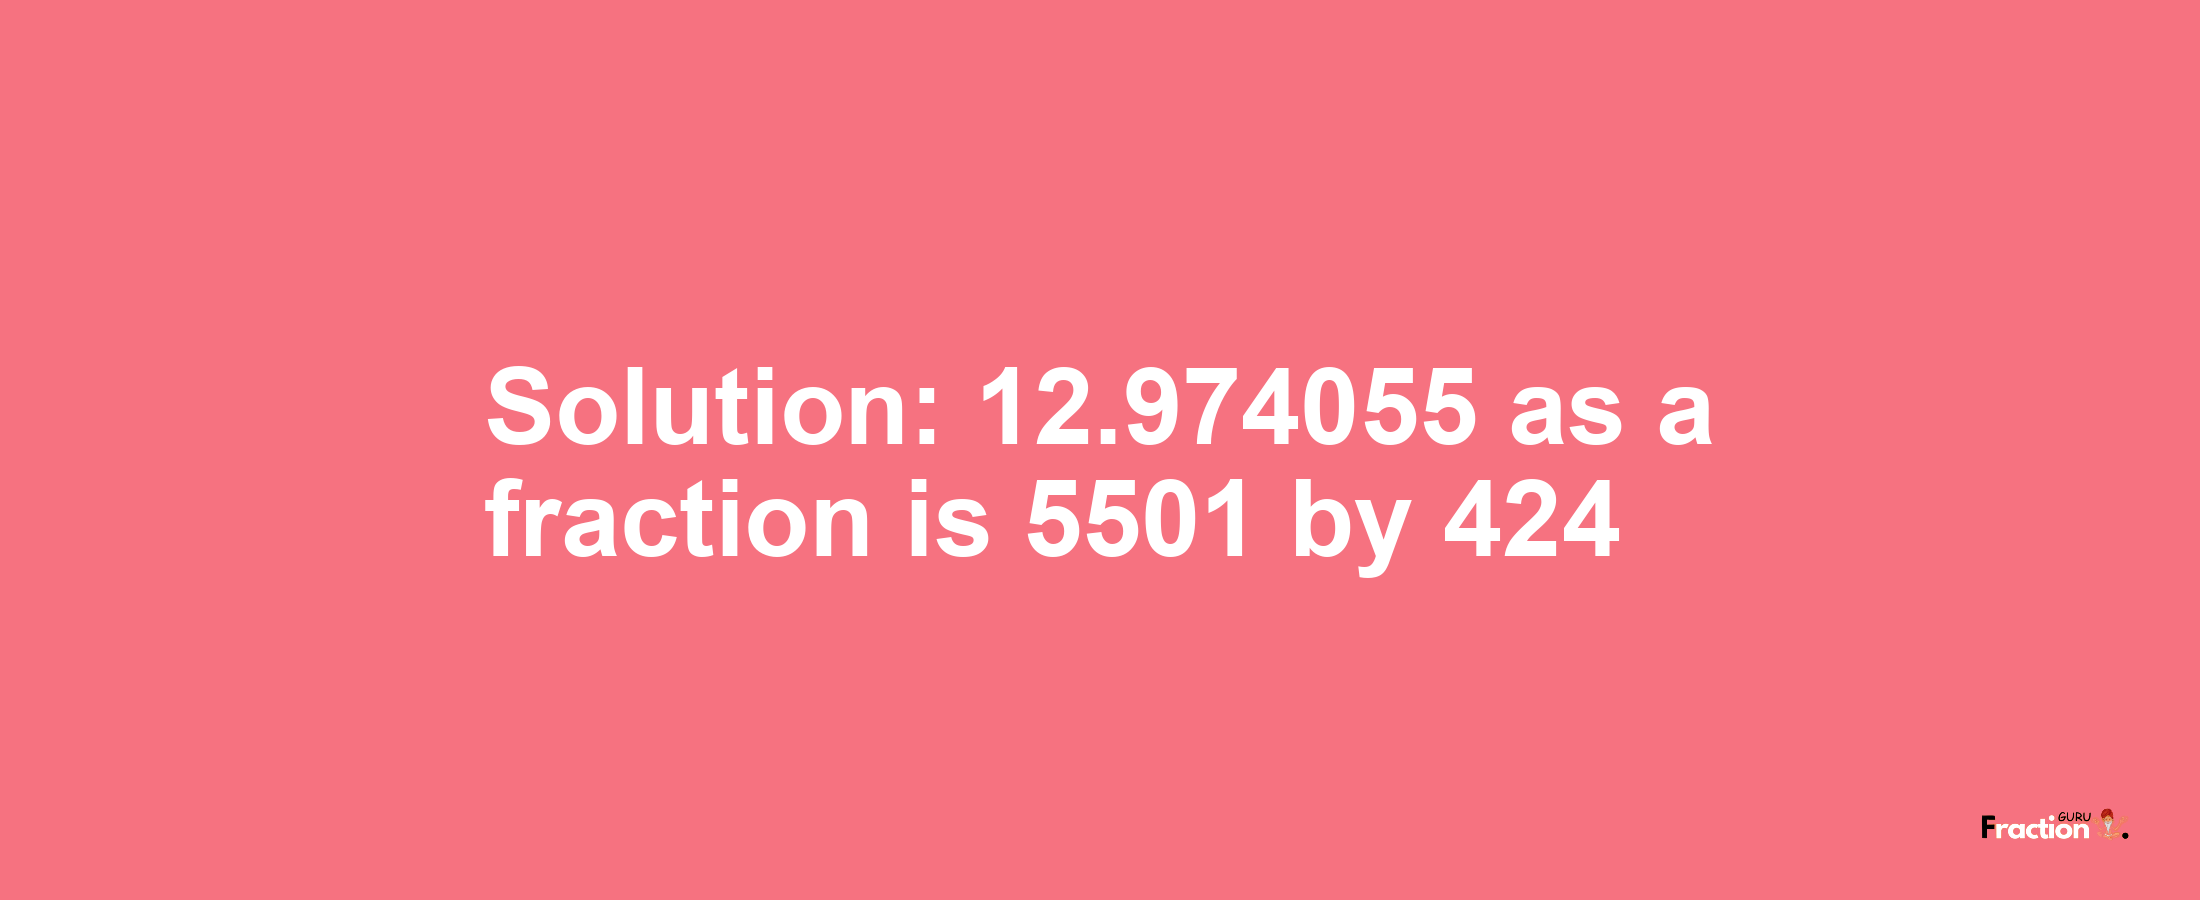 Solution:12.974055 as a fraction is 5501/424